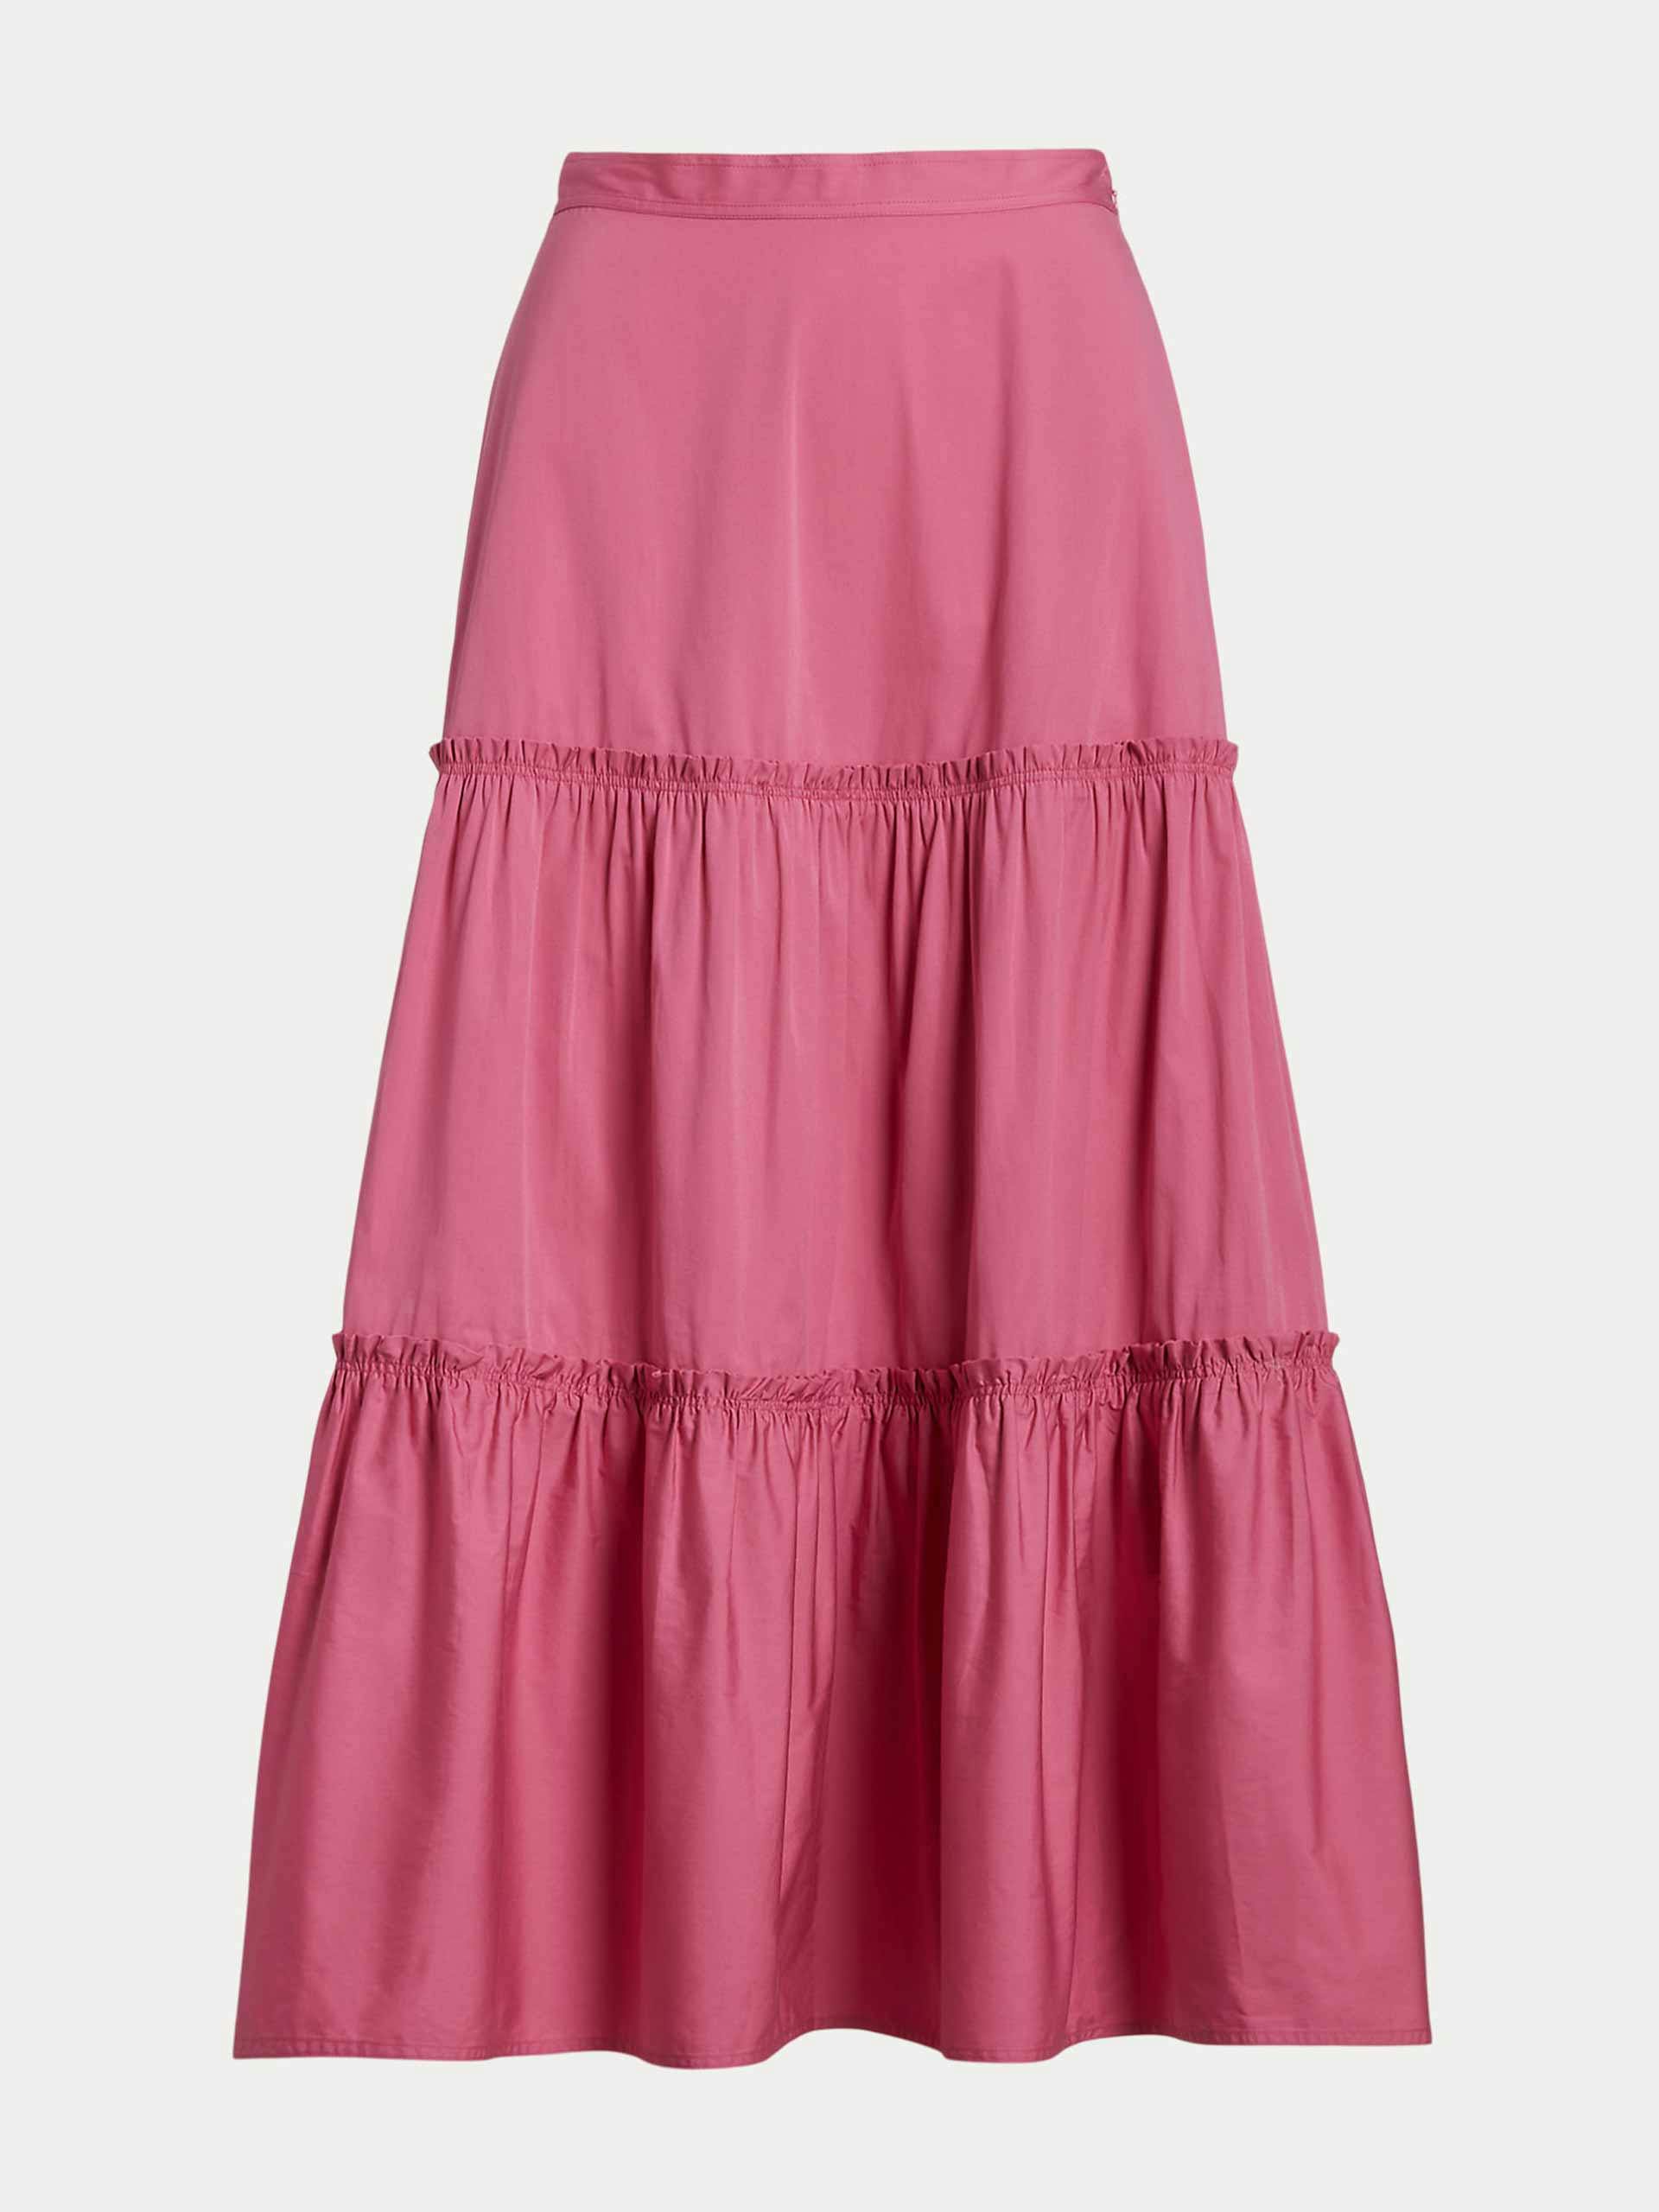 Pink tiered A-line cotton skirt